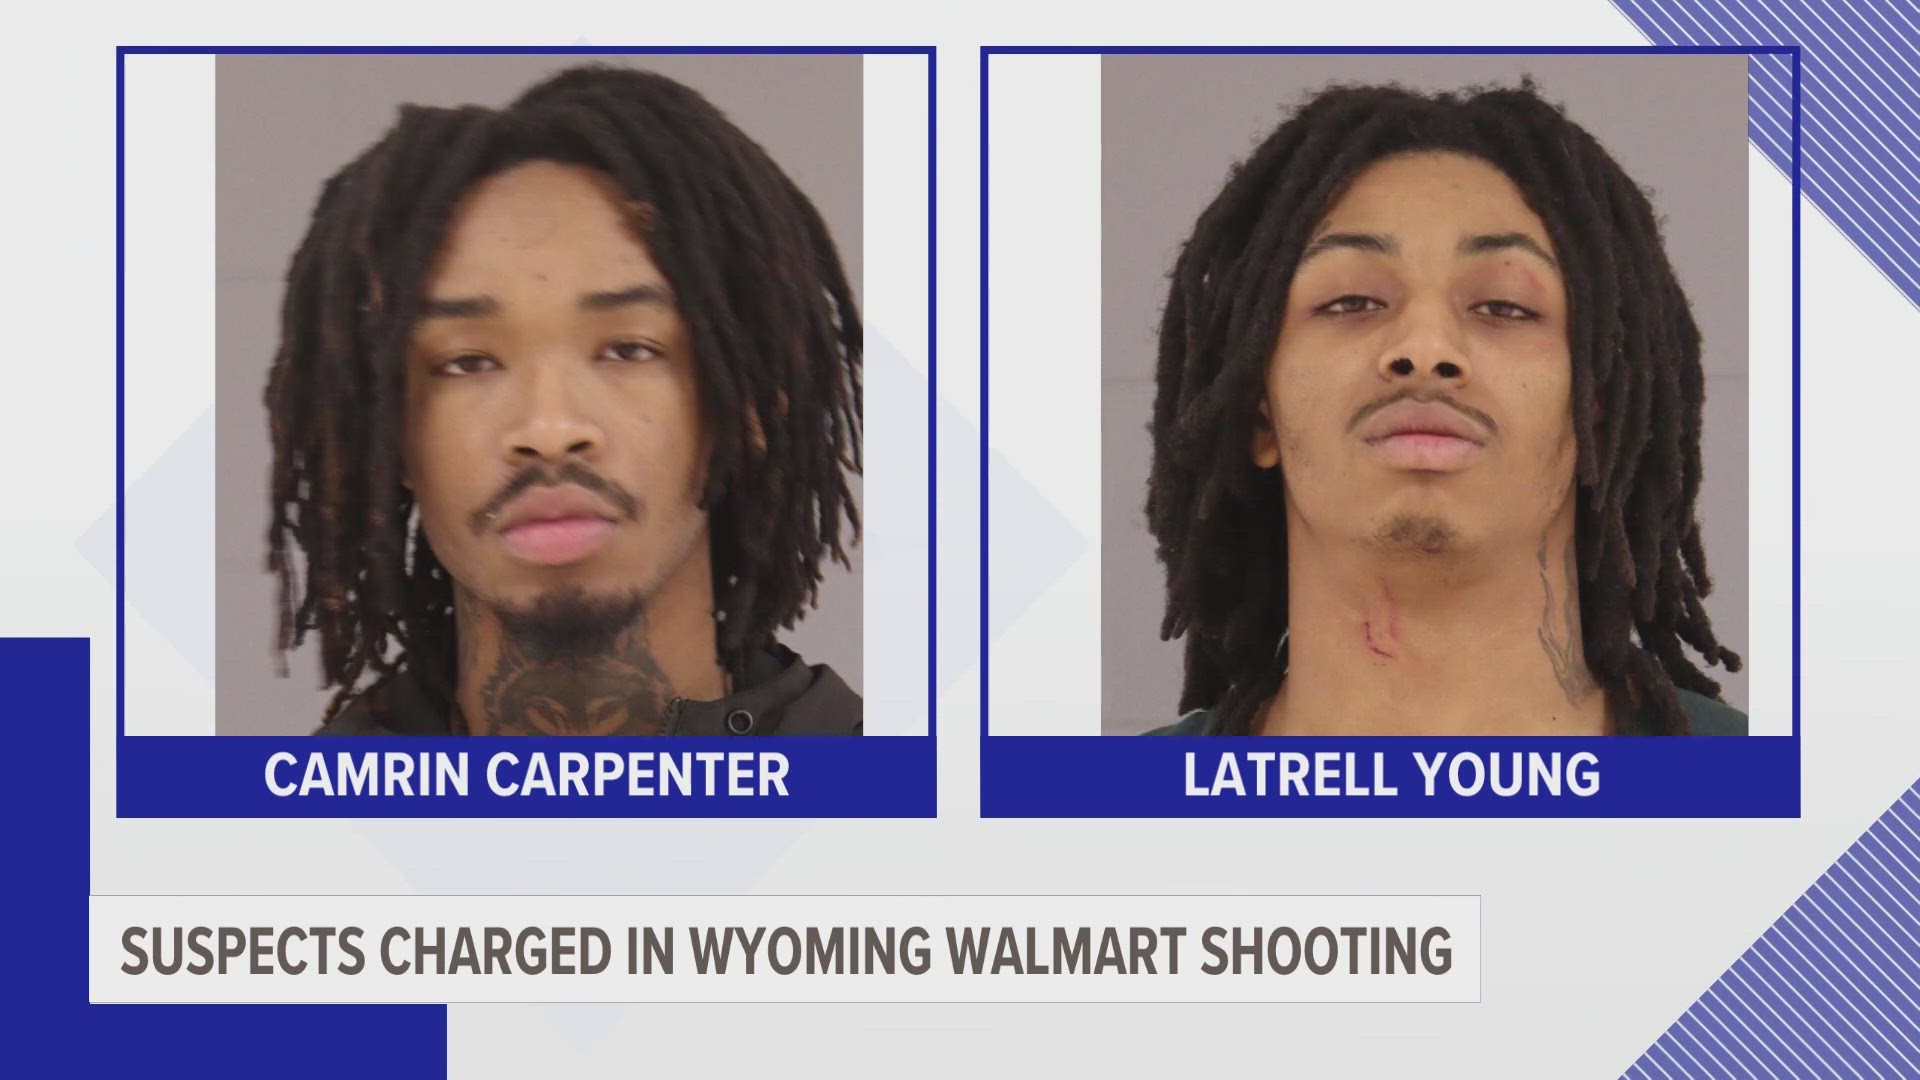 Two men are accused of getting into an altercation with another man over a cellphone at Walmart Supercenter on 54th Street. Two people were hurt in the shooting.